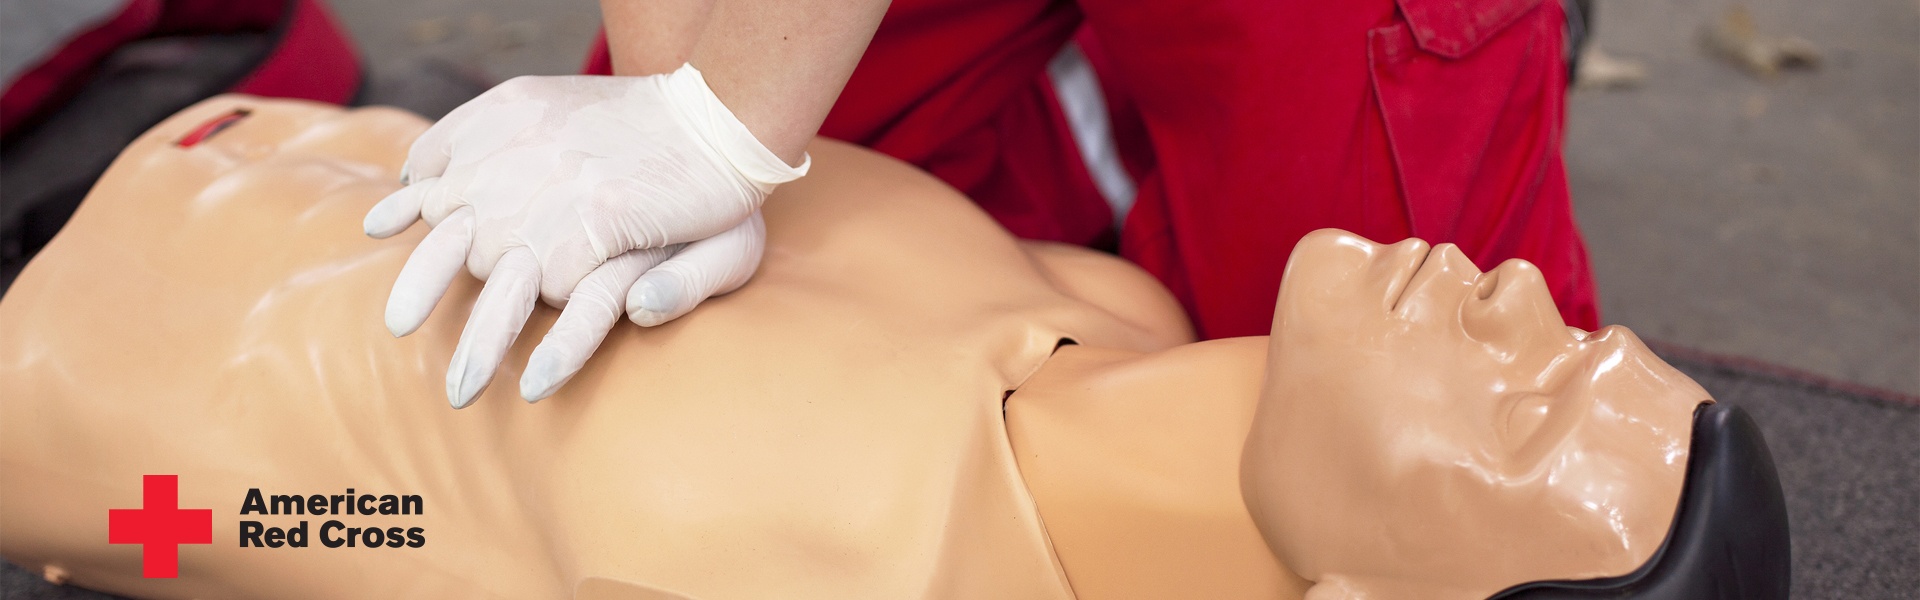 CPR/AED/First Aid for Adult & Pediatric • Full & Re-Certification Courses